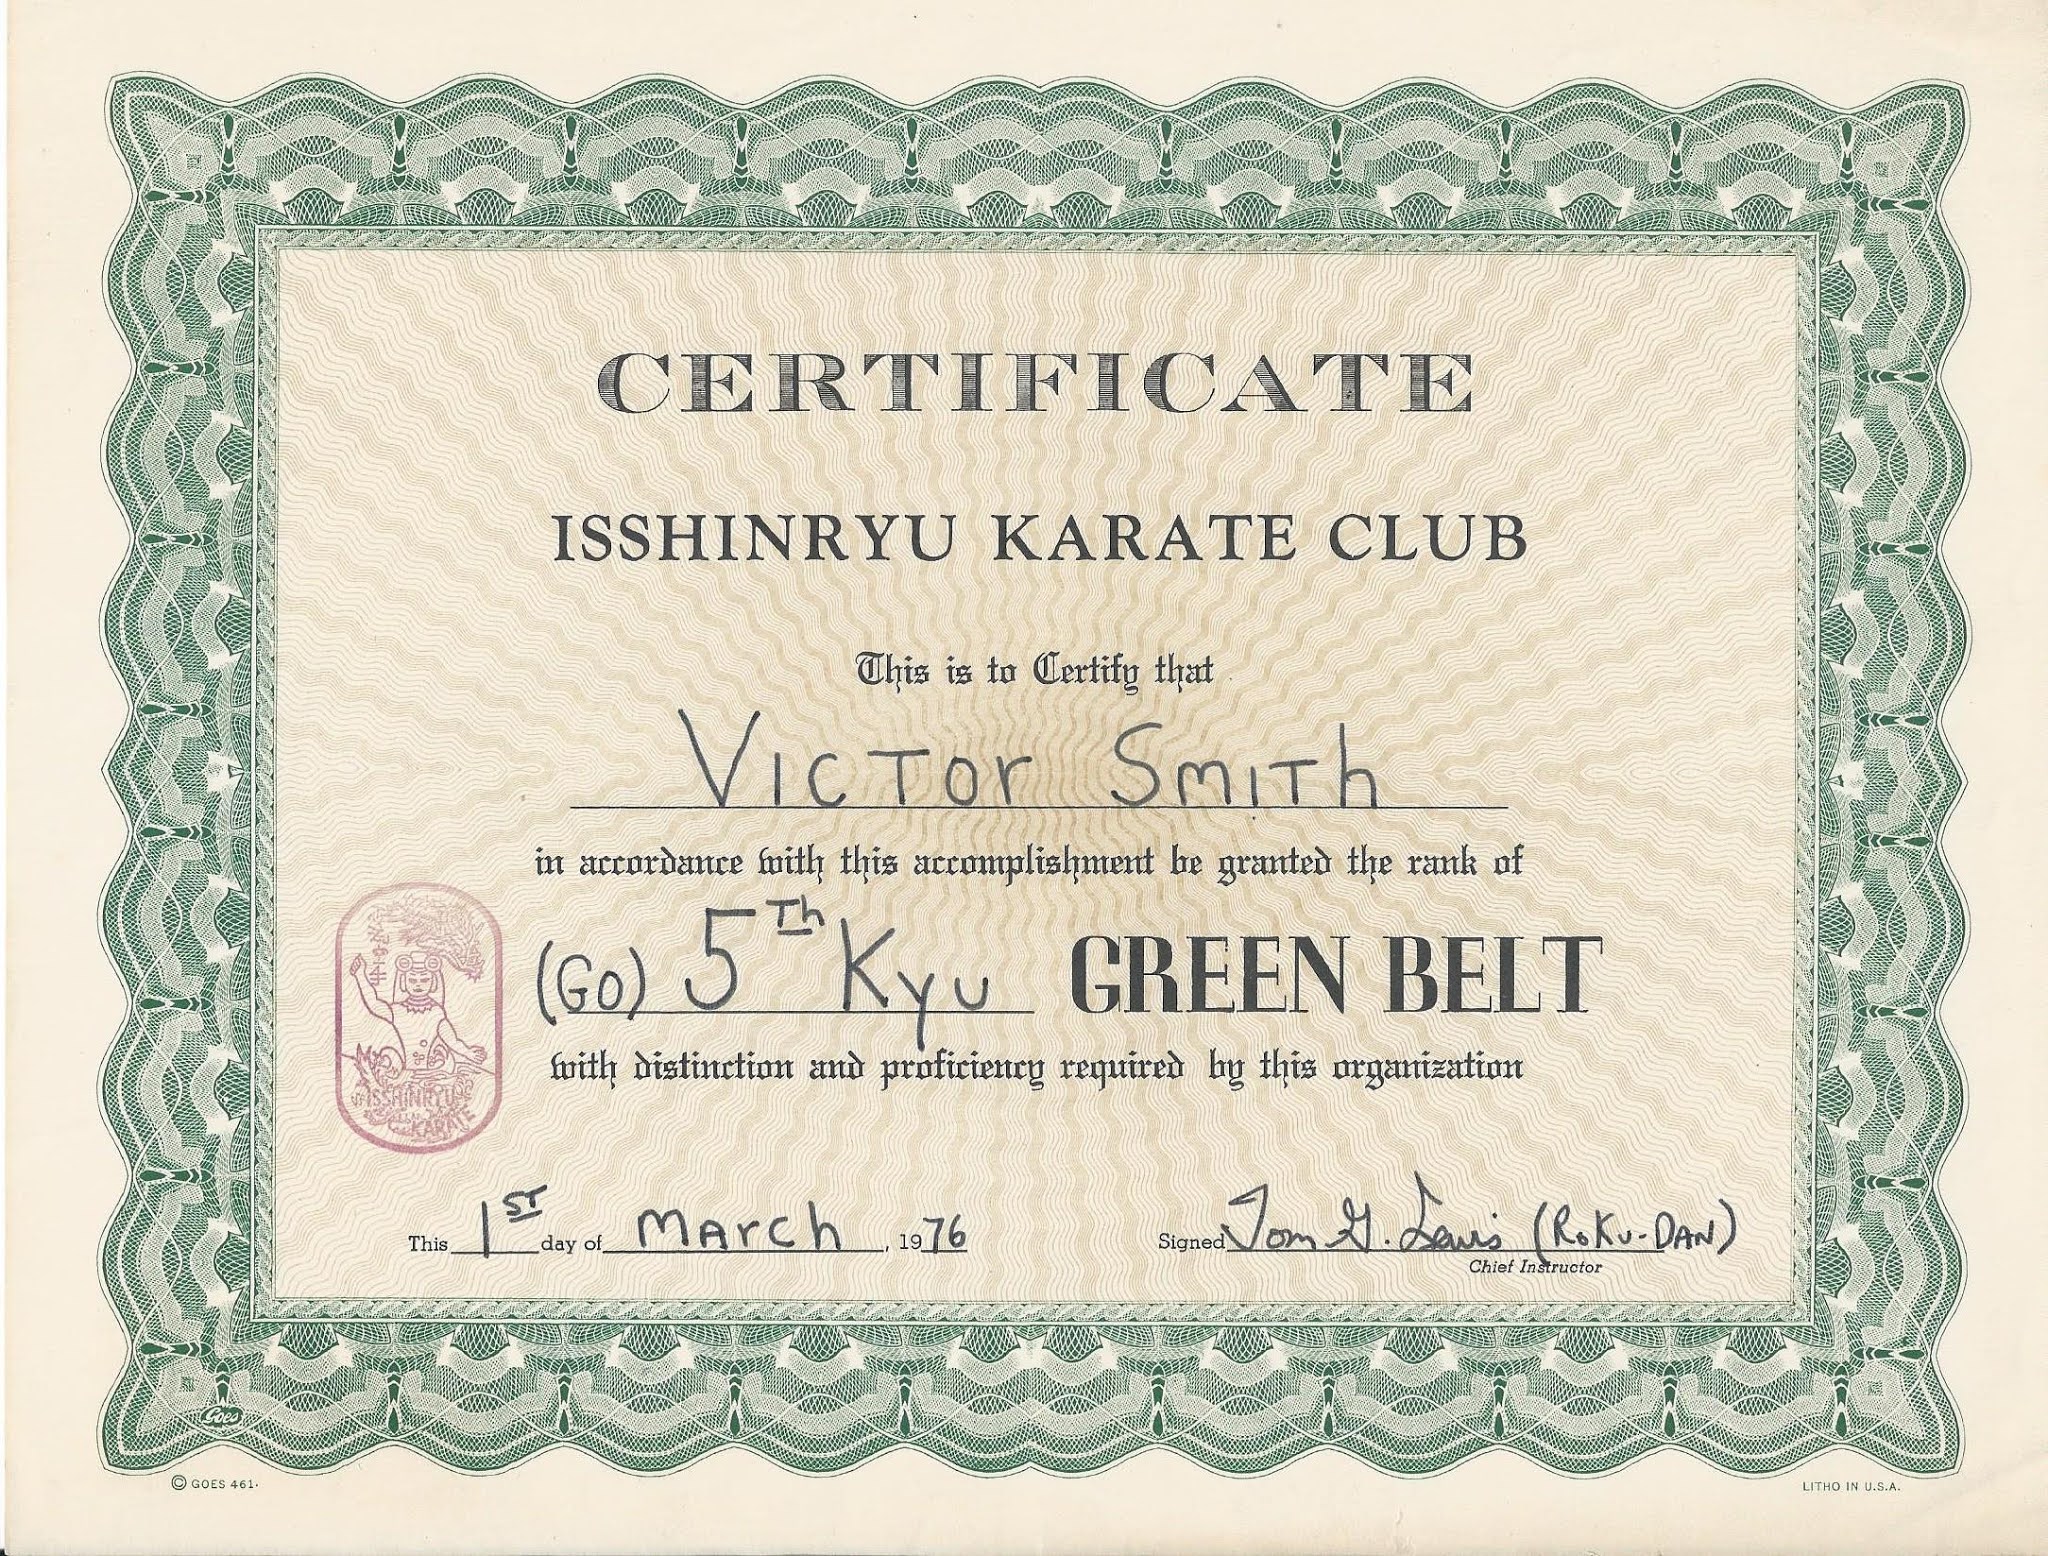 Isshin - Concentration the Art: The Karate Certificate and its meaning.